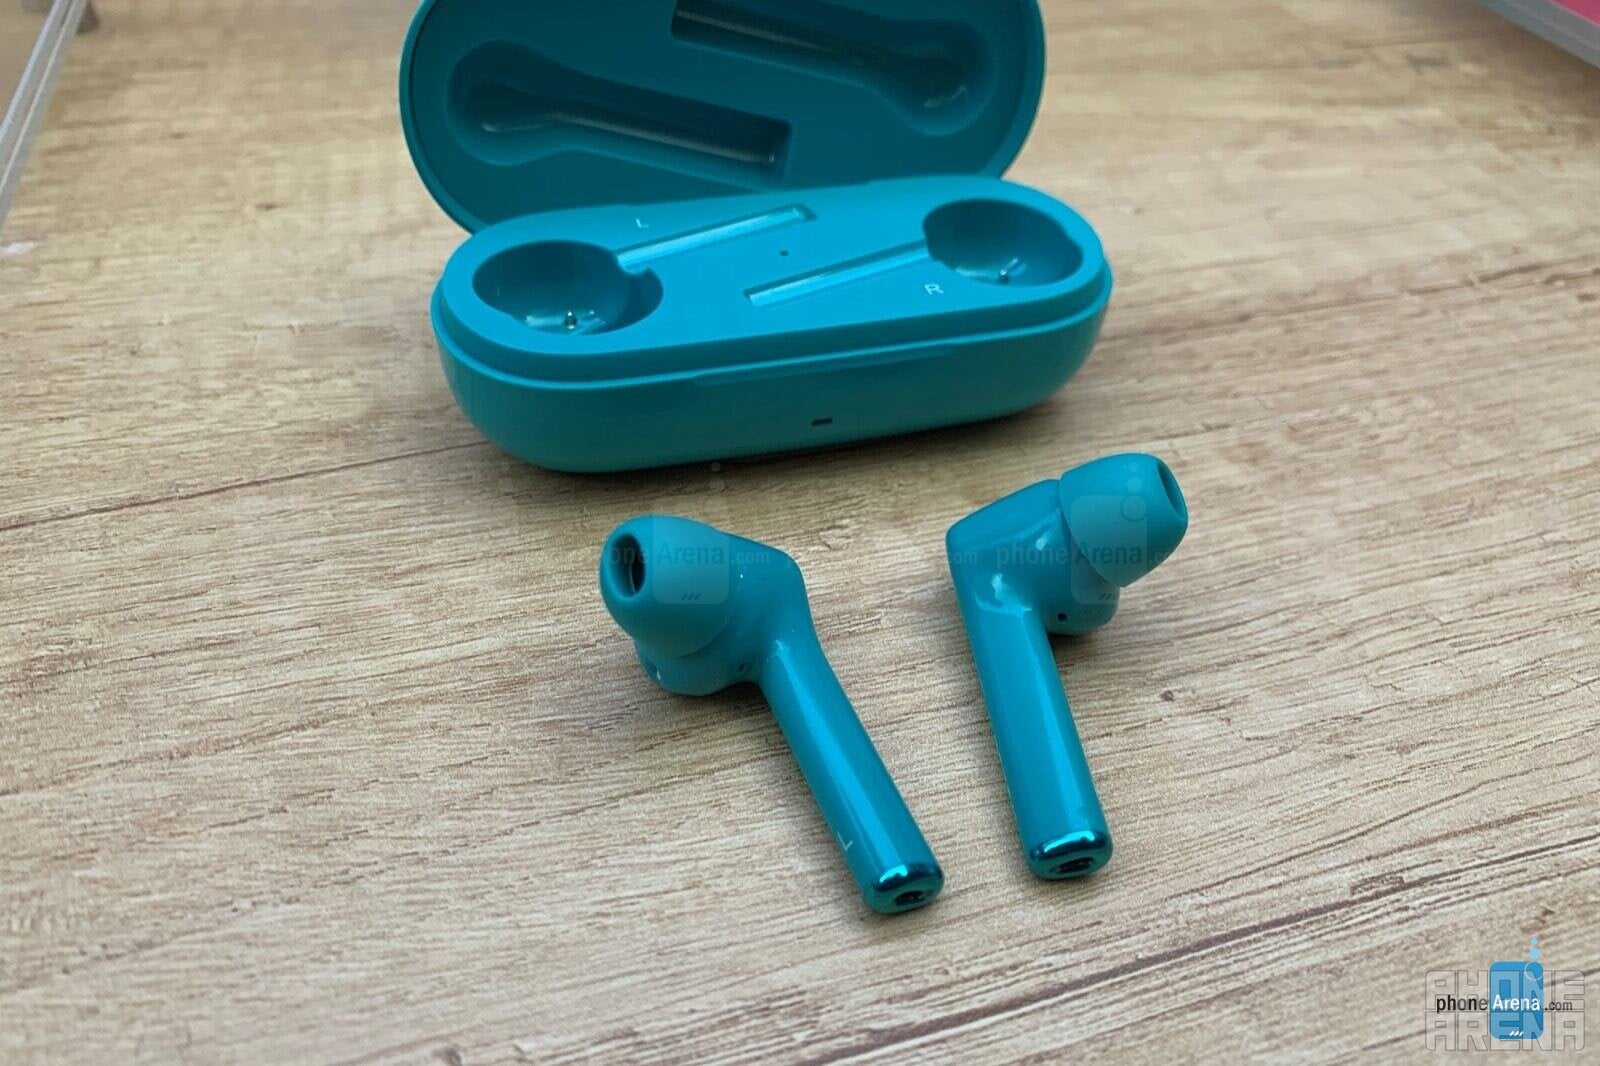 Honor Magic Earbuds: the latest AirPods clones come in teal